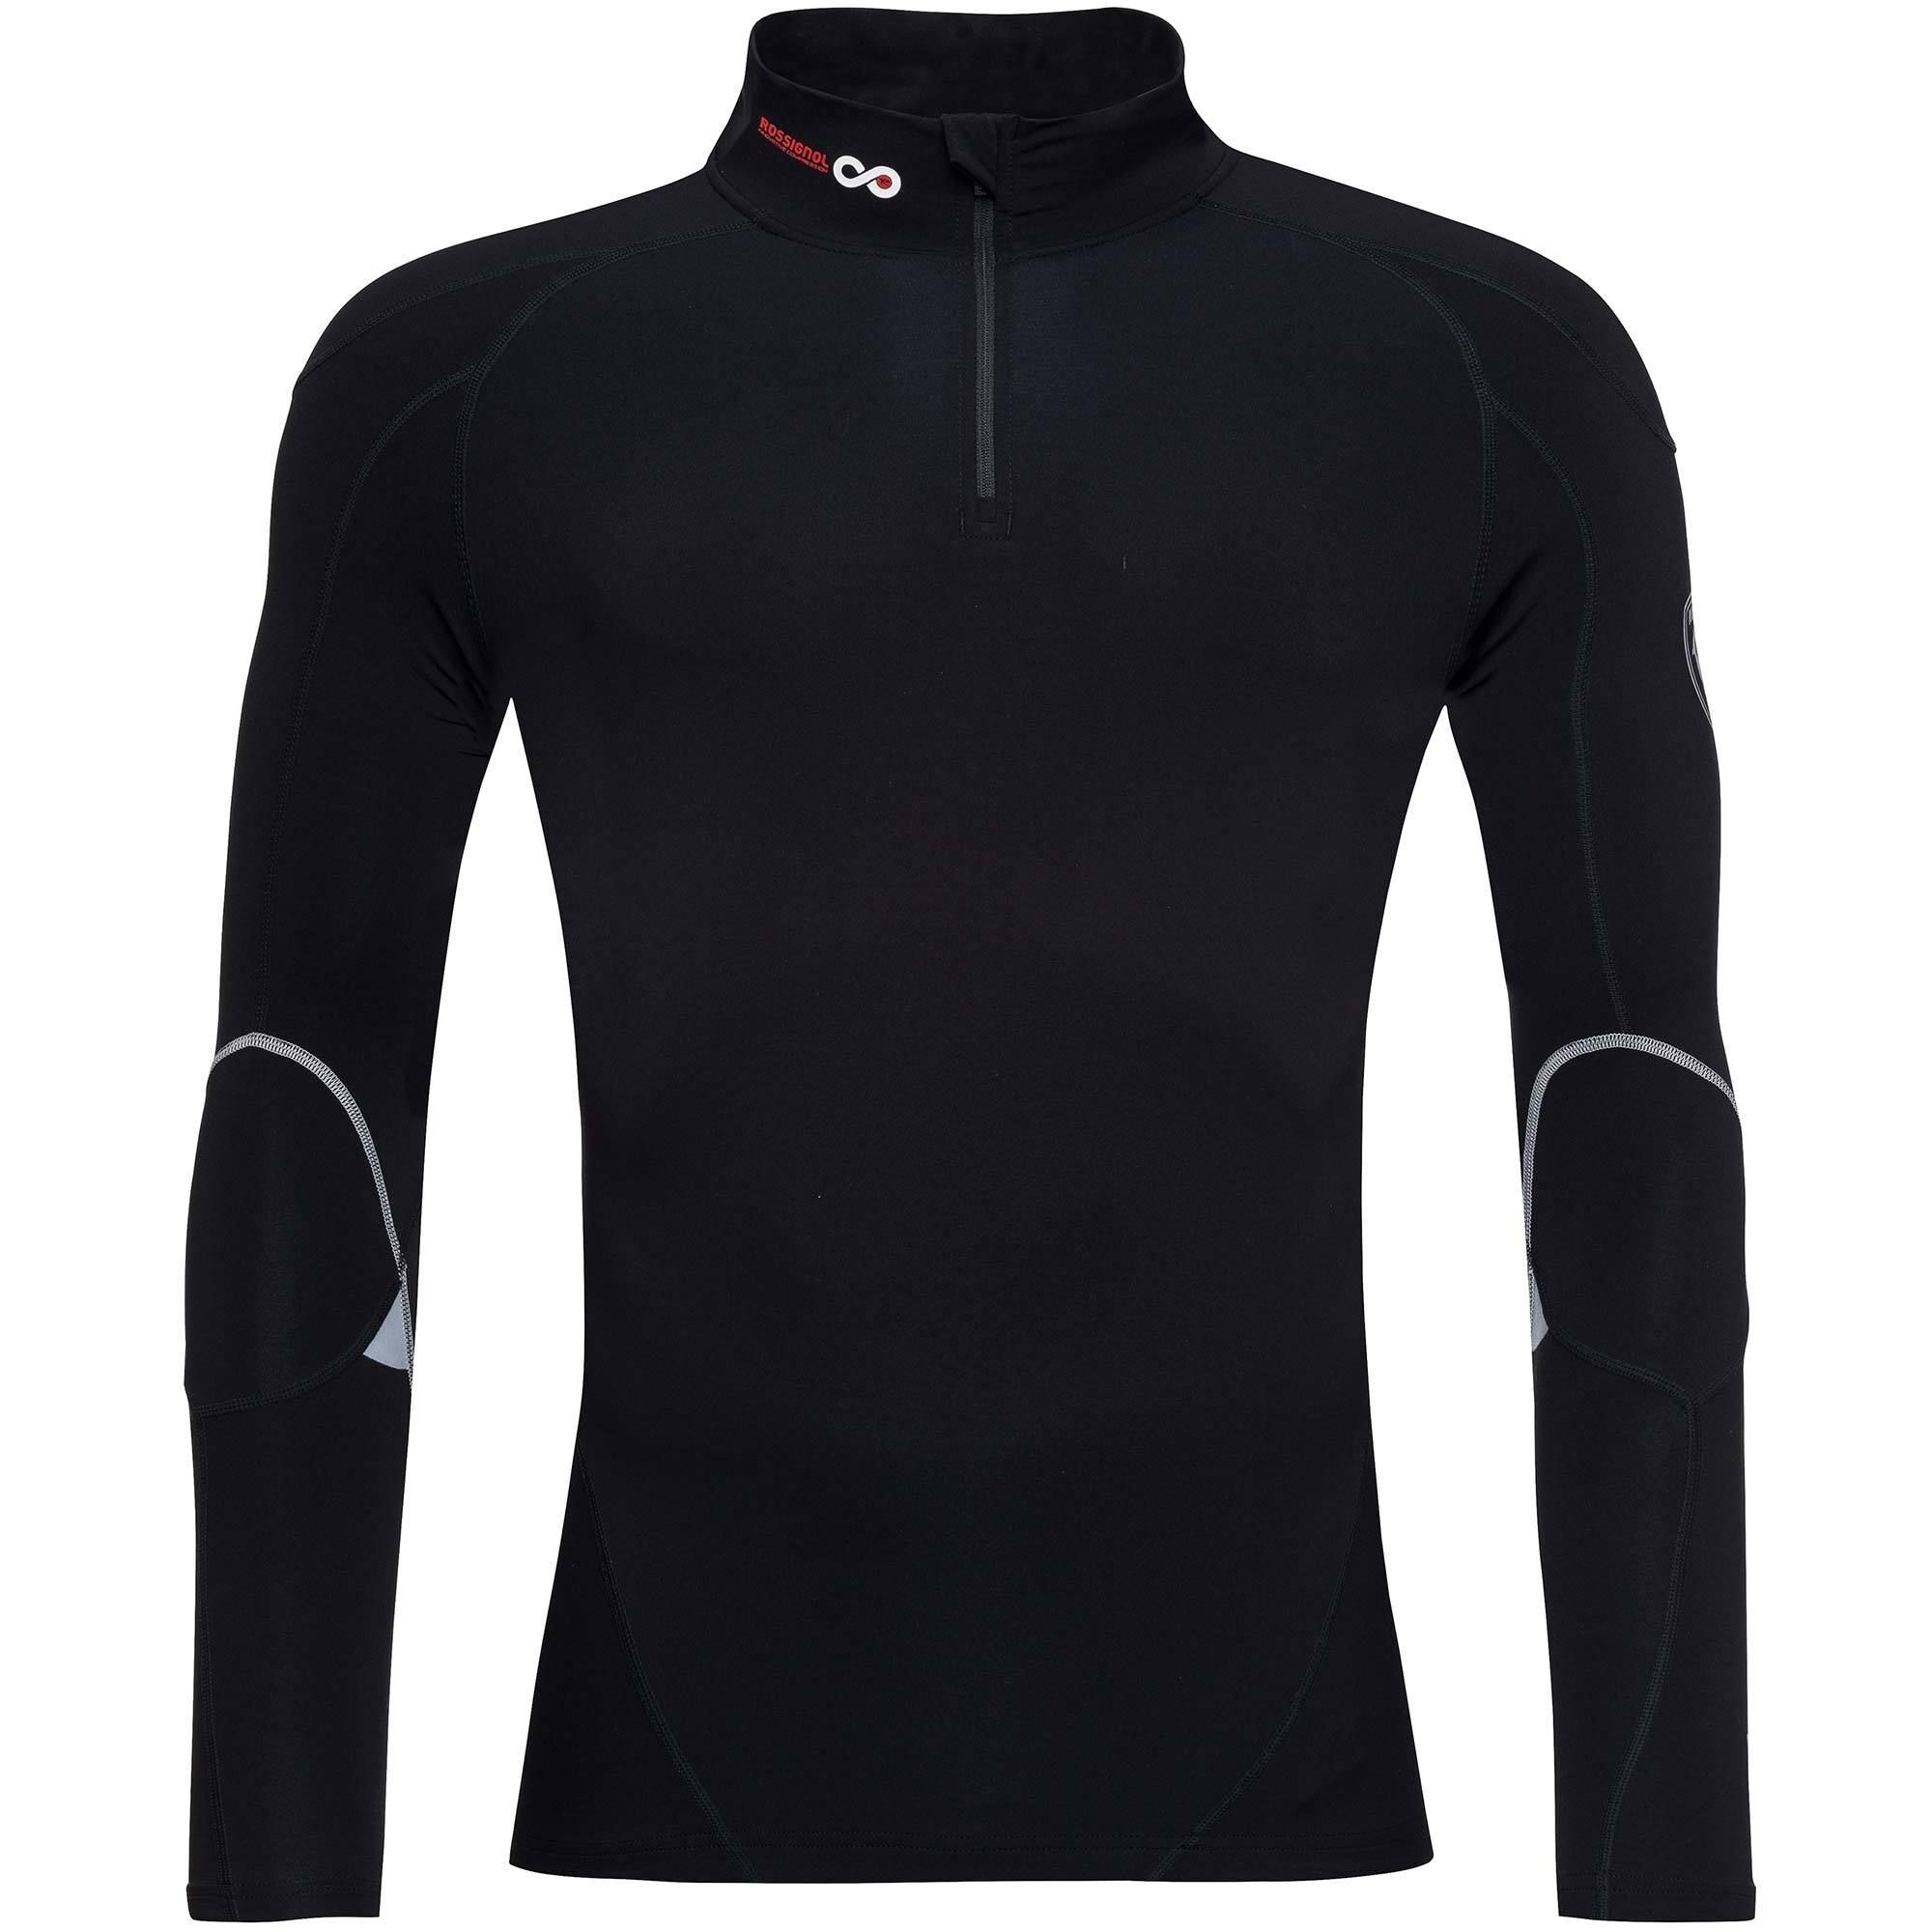 Rossignol Infini Compression Race Top - Base layer - Men's